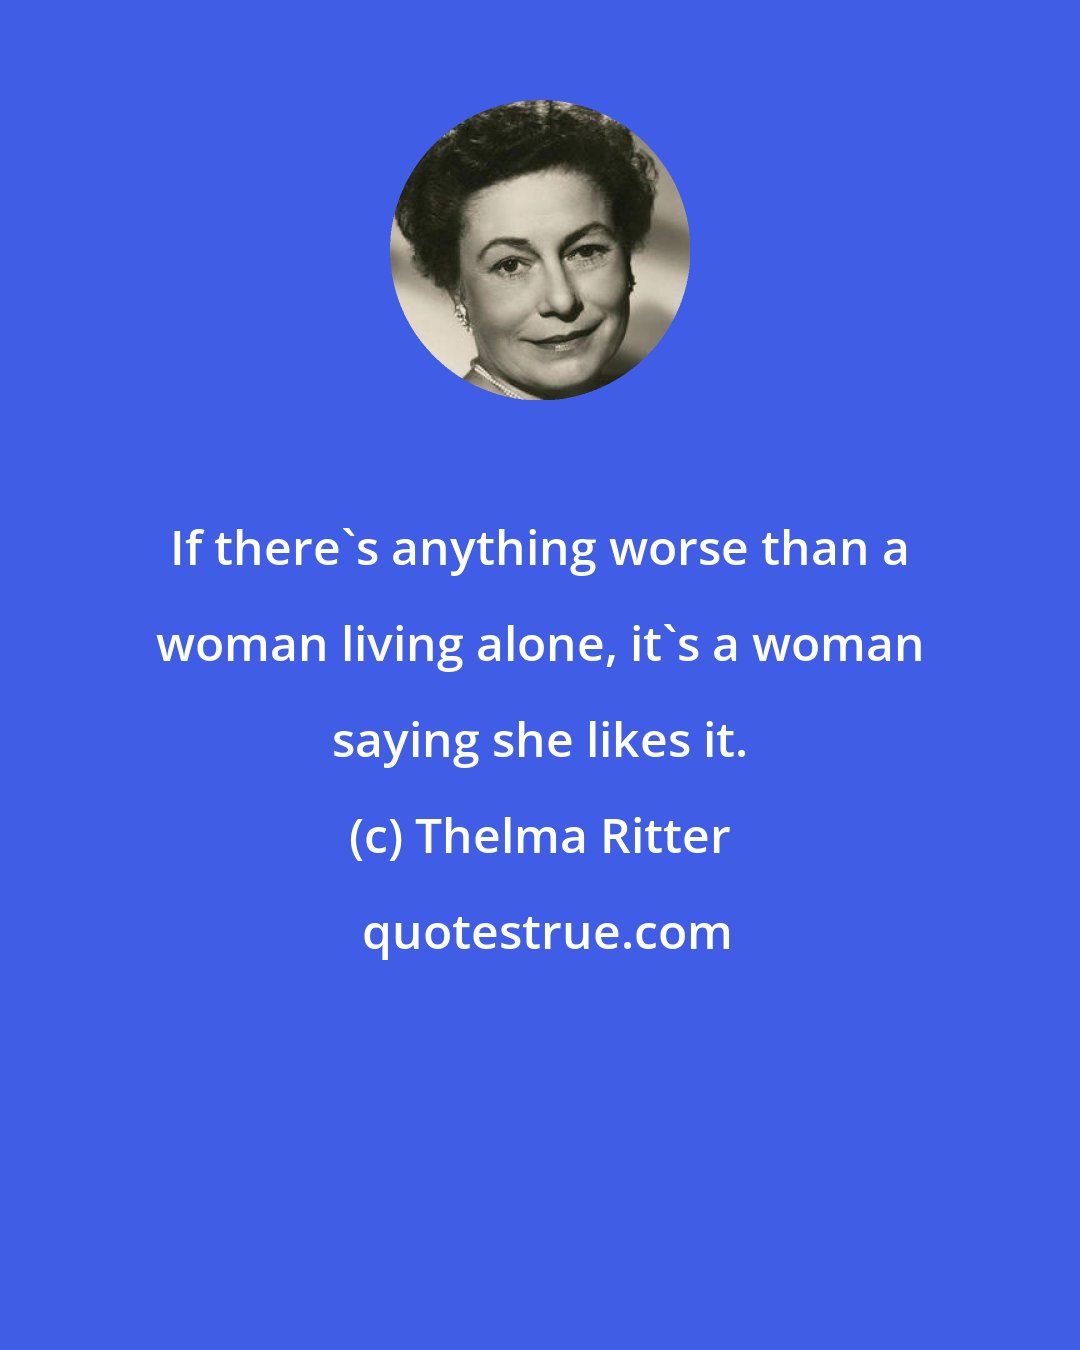 Thelma Ritter: If there's anything worse than a woman living alone, it's a woman saying she likes it.